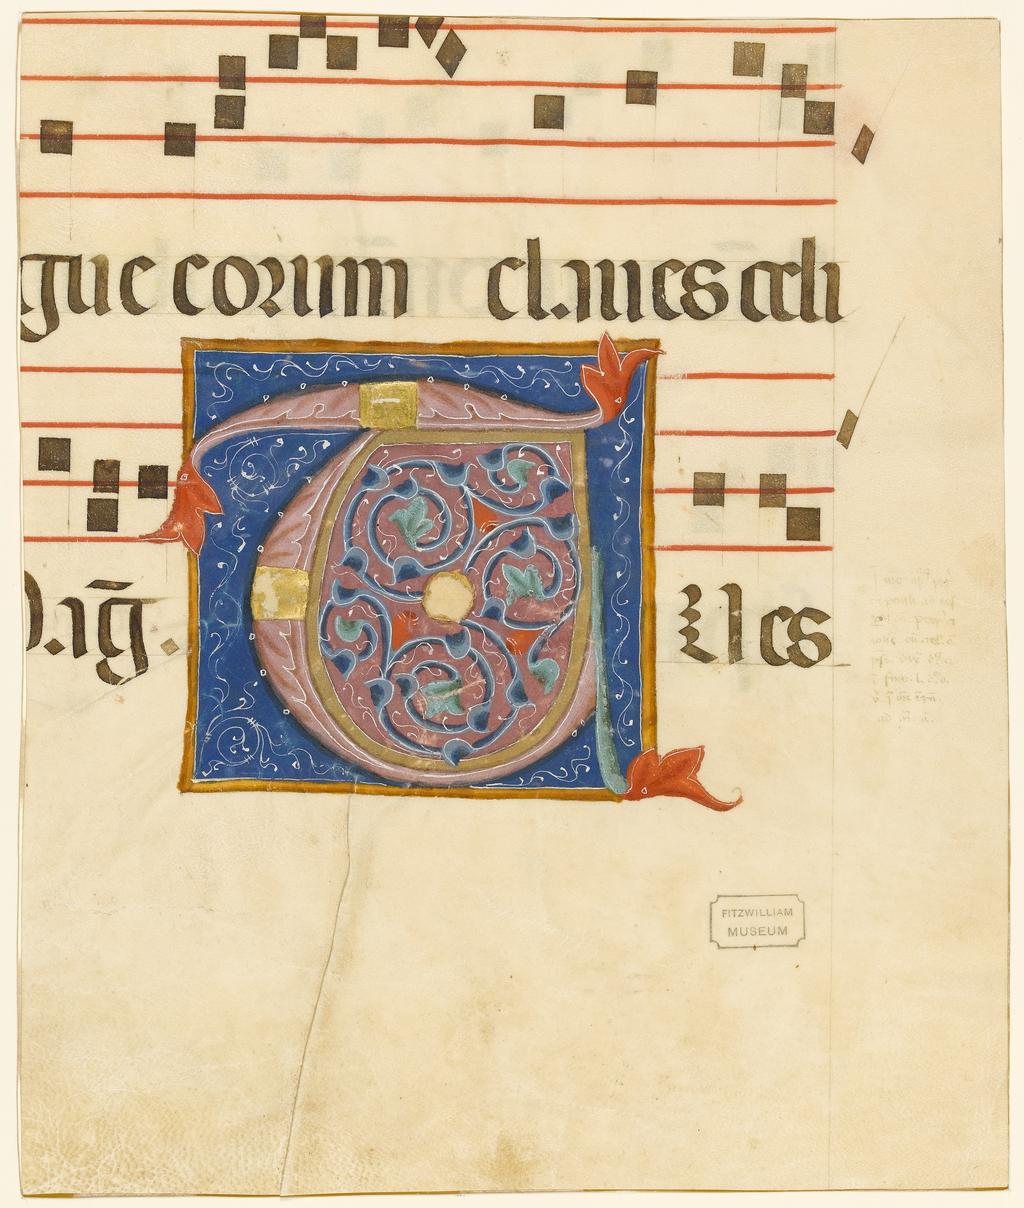 An image of Illuminated manuscript. Cutting from an Antiphoner for the Sanctoral.  Production Place: Italy, Perugia. Parchment, gold,  262 x 222 mm, two musical staves ruled in red ink, two fragmentary lines of text, ruled in brown ink,  circa 1325 to circa 1350.CONTENTS: On reverse, antiphon to the Magnificat at first Vespers for the feast of Saints John and Paul, [Astiterunt] iusti ante dominum et ab in[vicem non sunt] separati. P. Benedicens. Ad M.; on the side with the initial, the antiphon to the Magnificat at second Vespers for the feast of Saints John and Paul, [Isti sunt due olive et duo candelabra lucencia ante dominum habent potestatem claudere celum nubibus et aperire portas eius quia lin]gue eorum claves celi [facte sunt]. Mag. Tu es [pastor ovium]; the initial T introduced the antiphon to the Magnificat at first Vespers for the feast of Saints Peter and Paul (which follows the feast of Saints John and Paul), Tu es pastor ovium, and would have been on the verso of the original leaf. ORNAMENTATION: Ornamental initial in liquid gold and pink on blue and dark pink grounds with coloured vine-scroll infill and acanthus extensions forming partial borders. Alternate red or blue initials [height of the gap between staves] with purple or red pen flourishing, using small scallop and trefoil motifs.